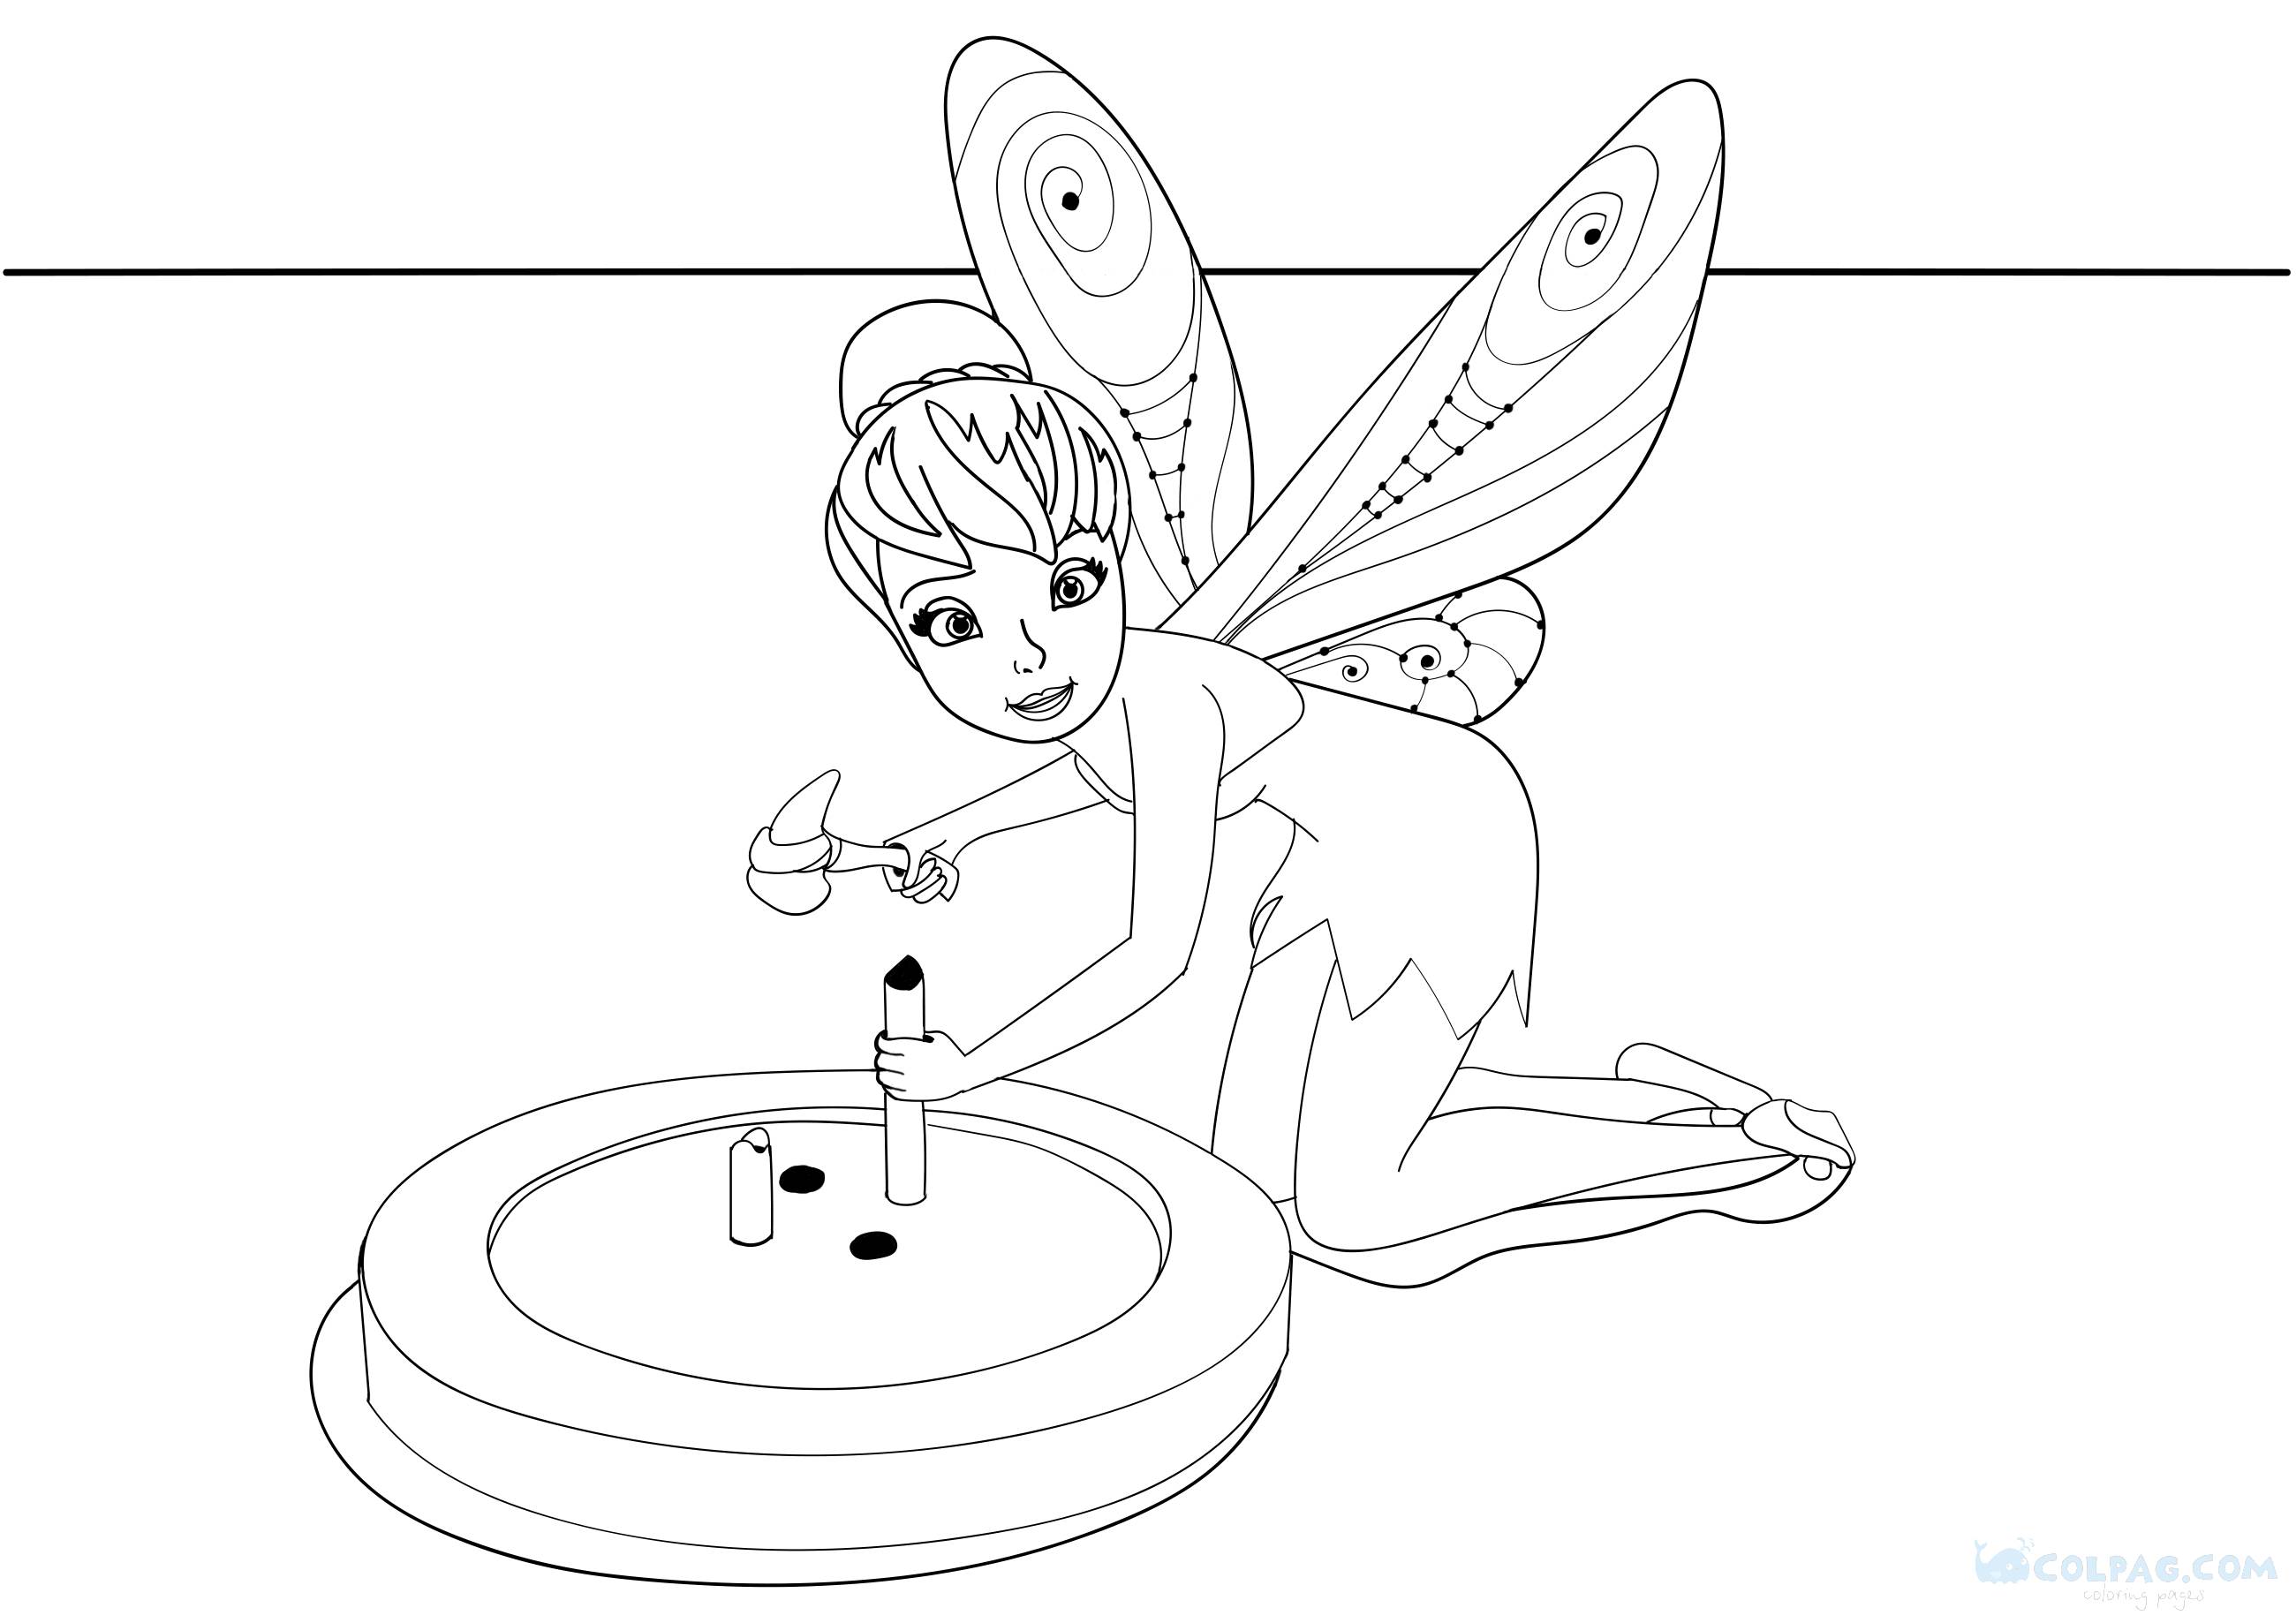 tinkerbell-coloring-page-colpag-com-10